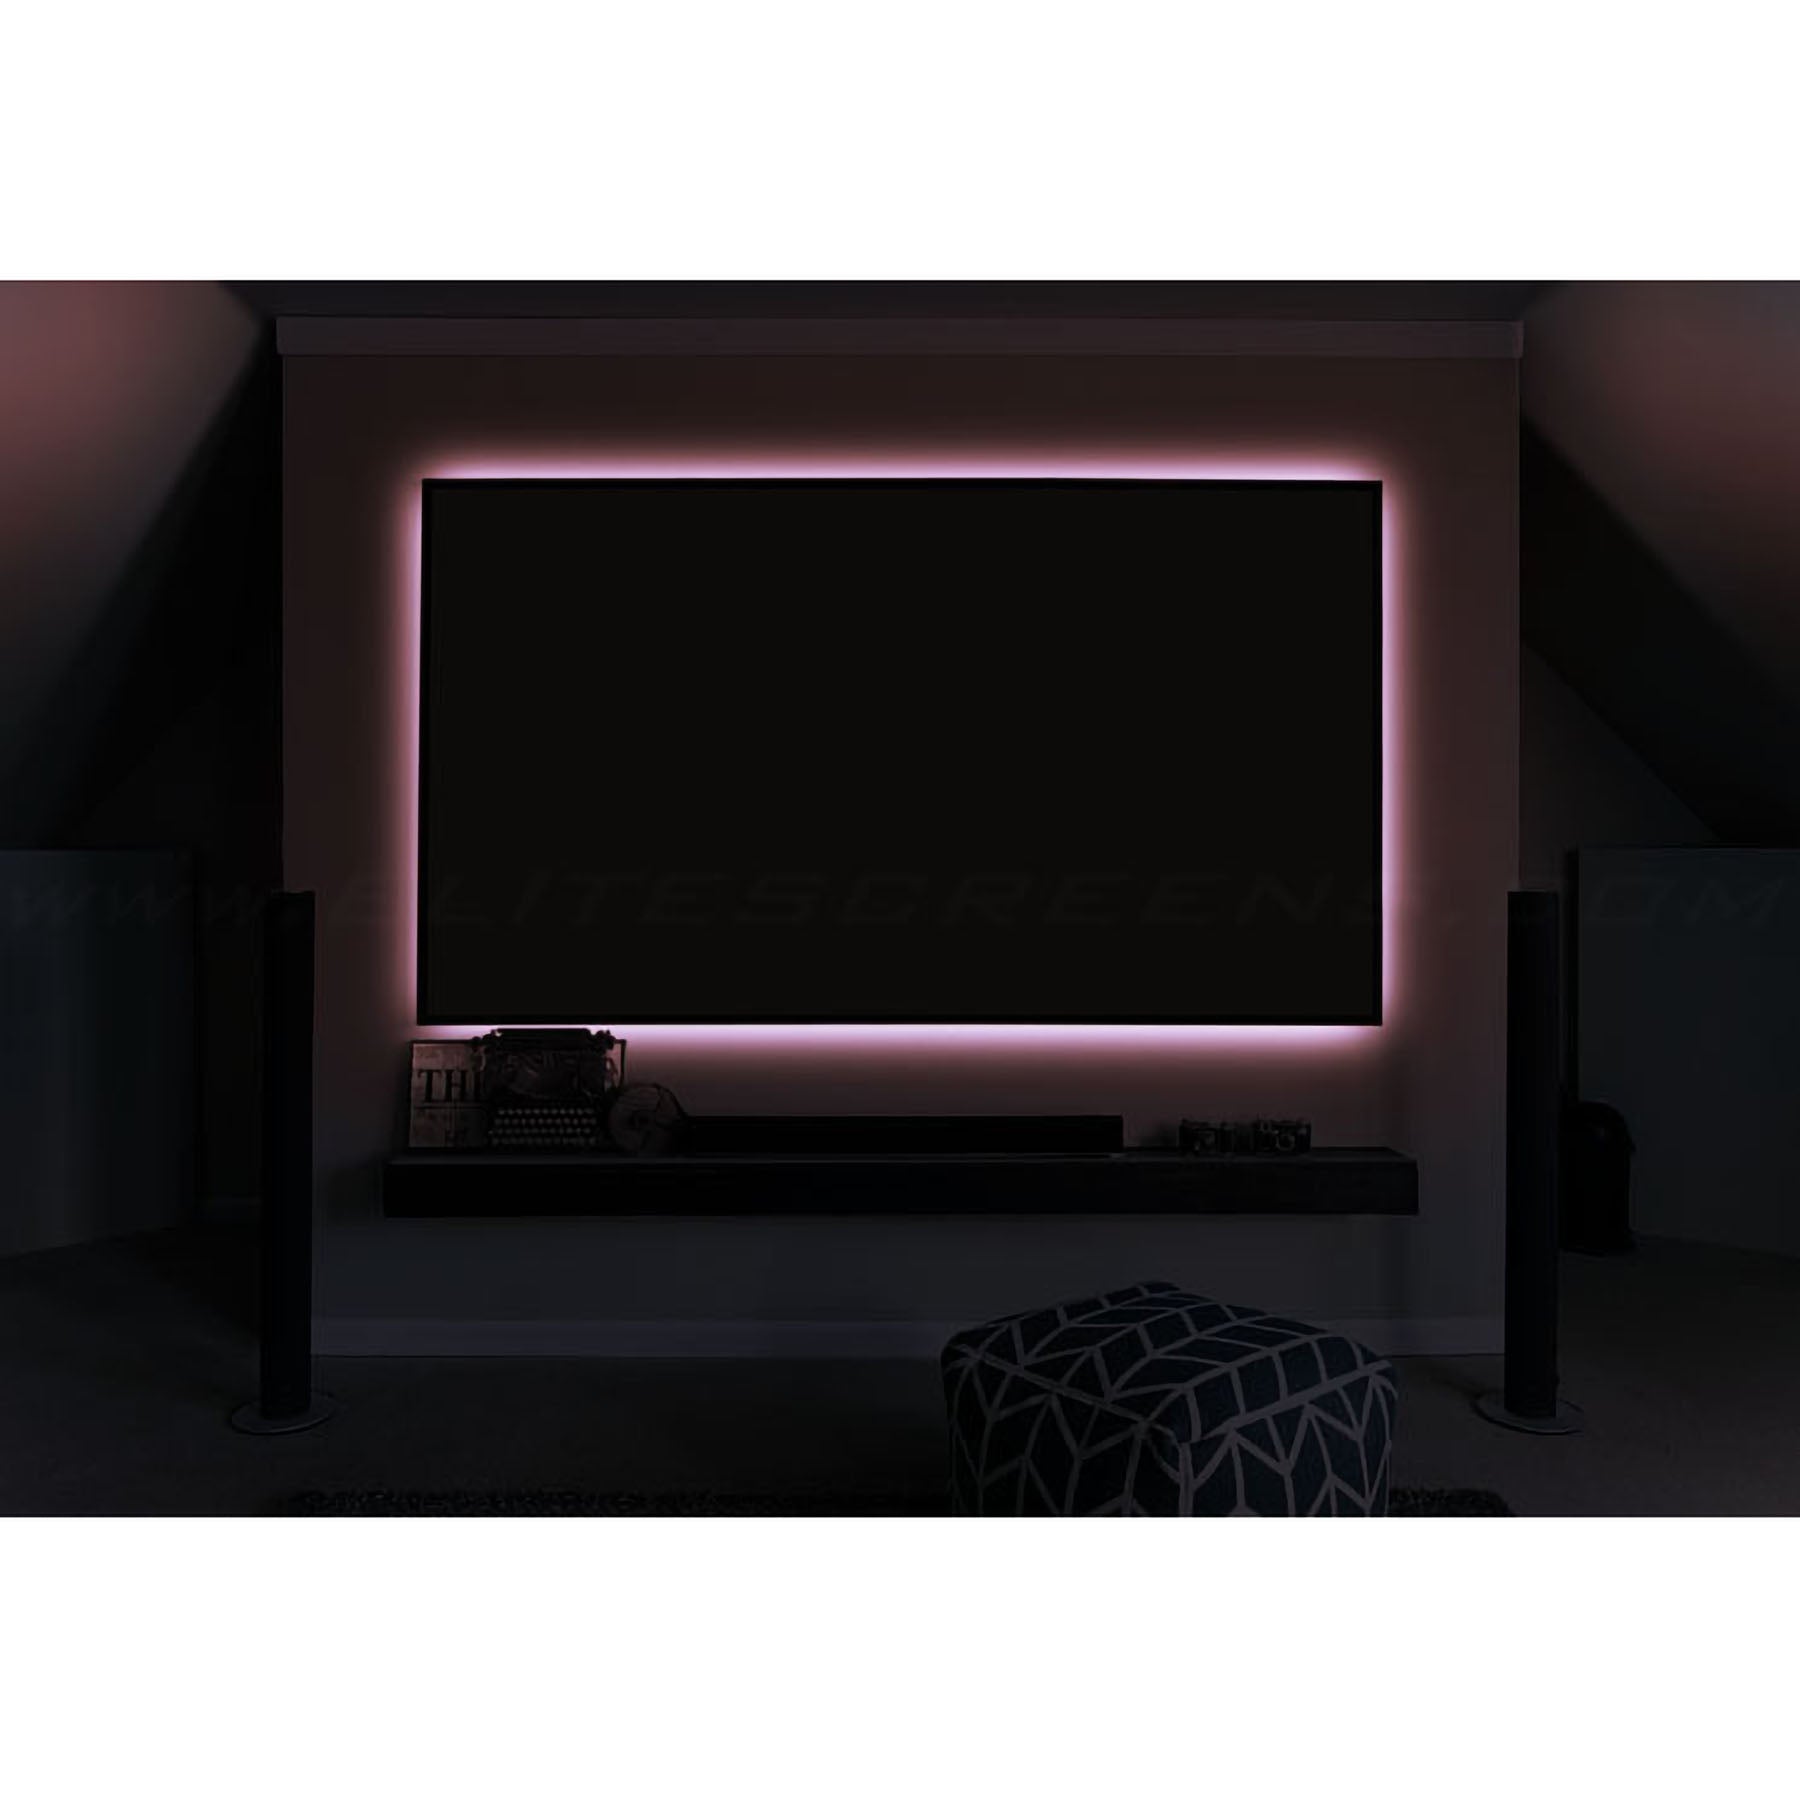 Elite Screens AR120DHD3 Aeon CineGrey 3D 120" 16:9 4K Fixed Screen with Edge Free Frame & Ambient Light Rejecting